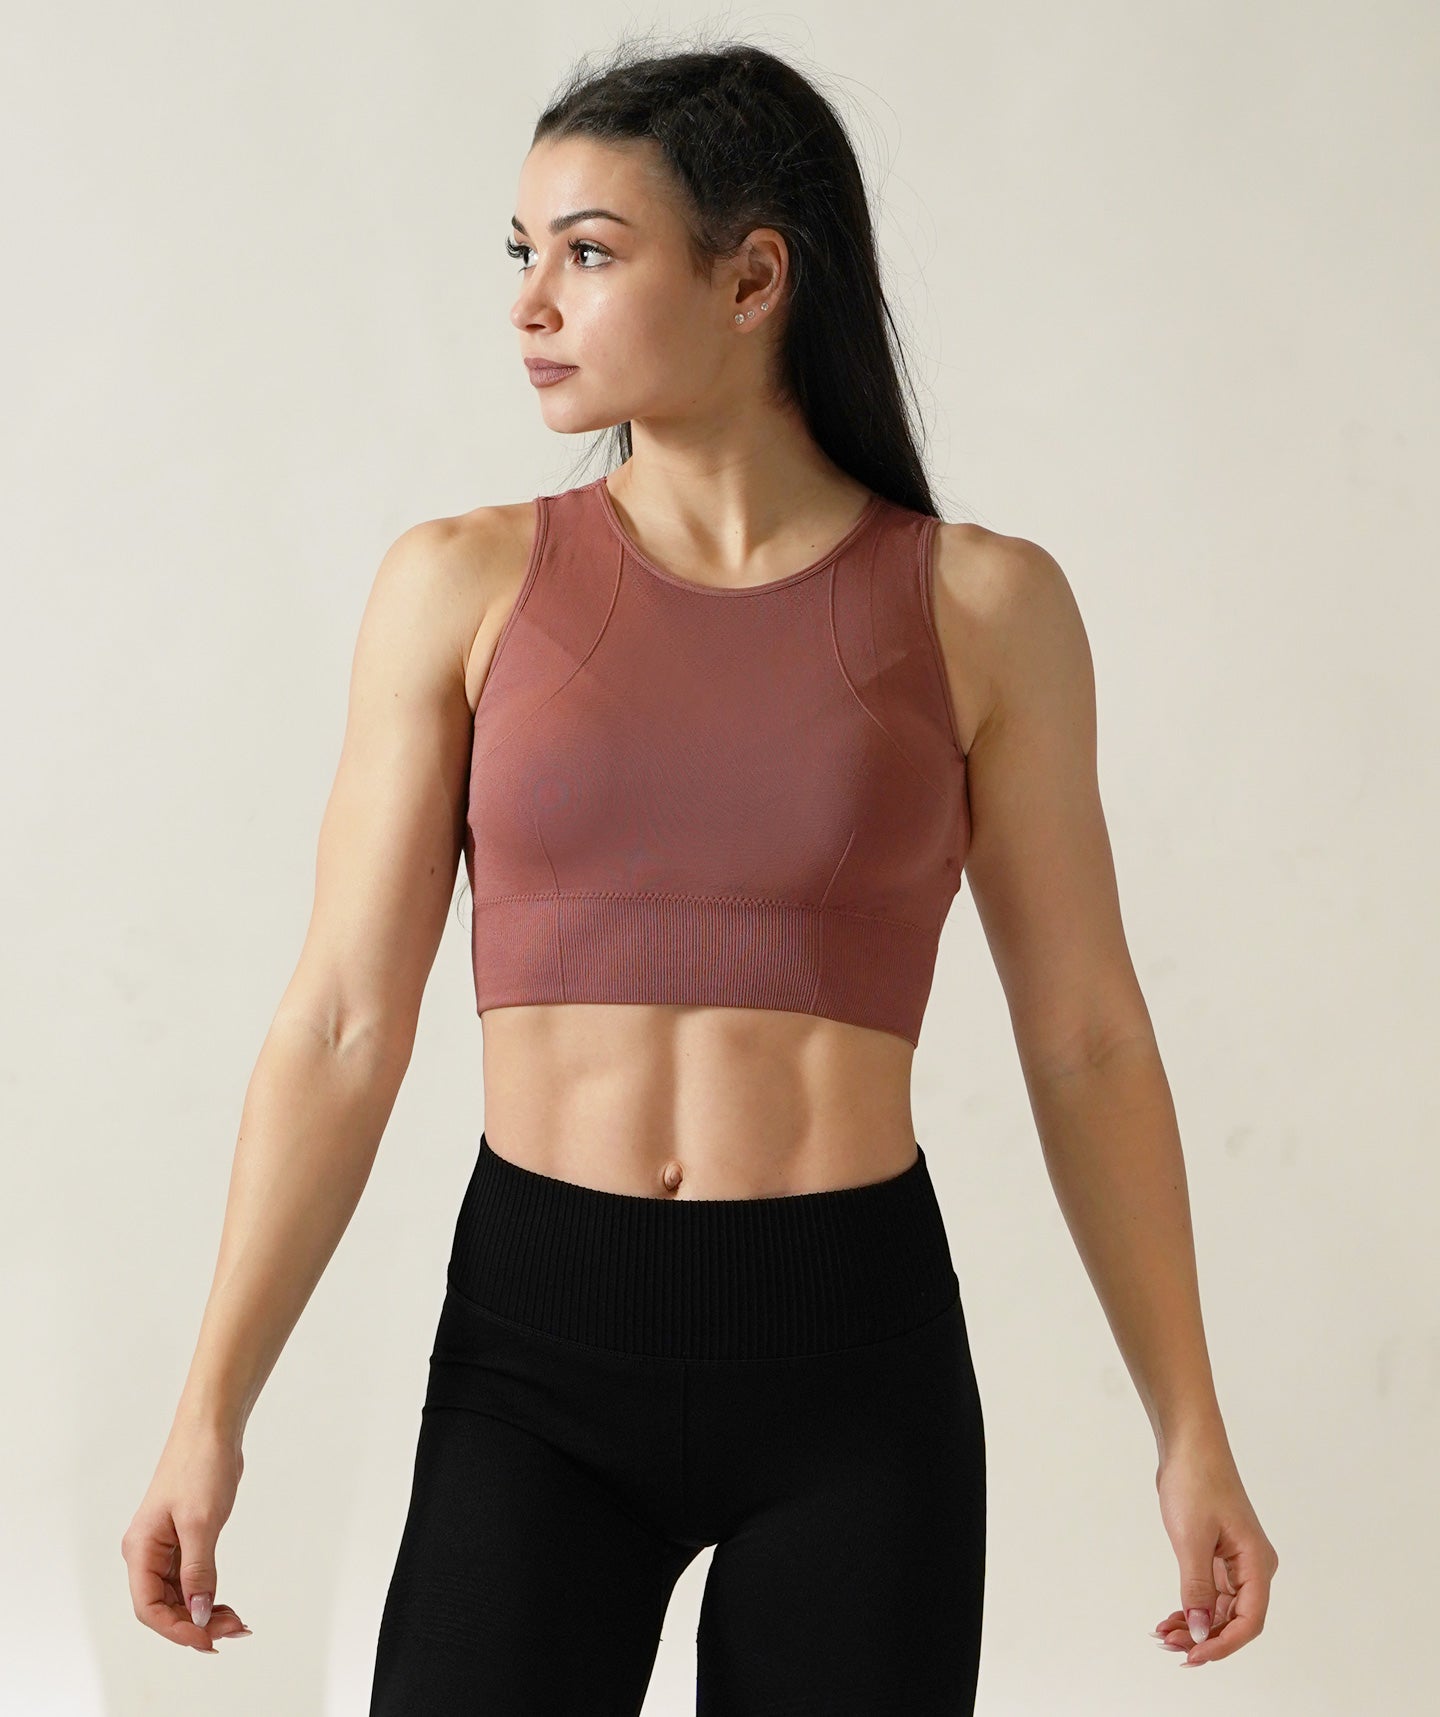 Equinox Crop Top with Transparent Mesh in Indian Red